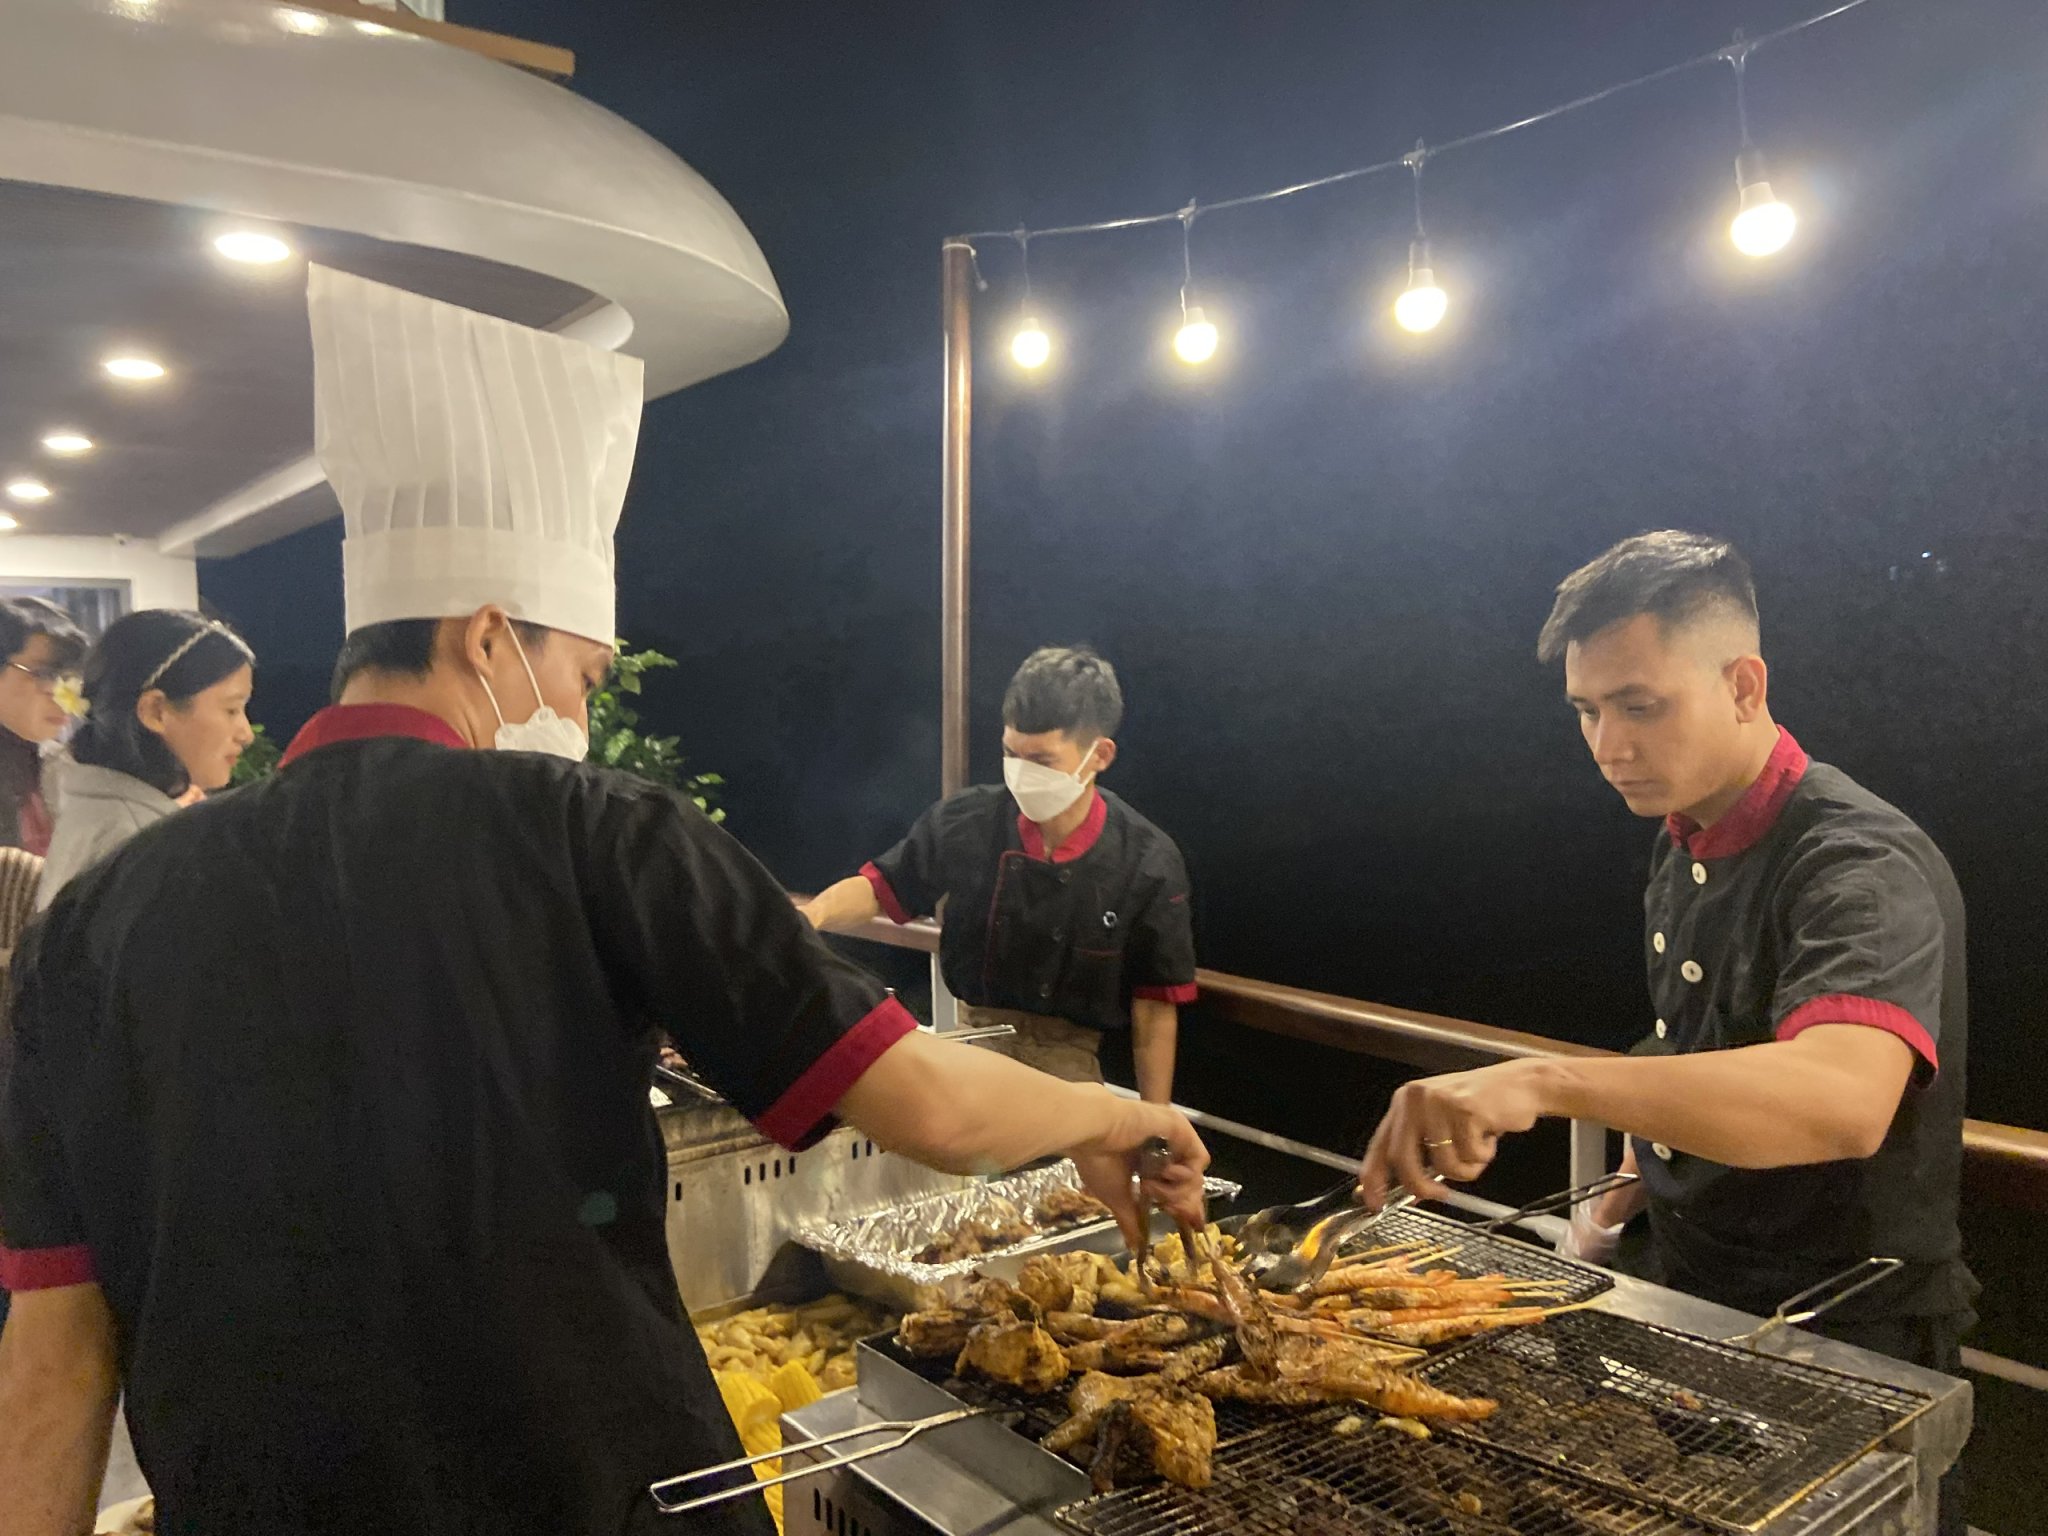 Chefs serve guests with outdoor BBQ party on the cruise. Photo by VnExpress/Lan Huong